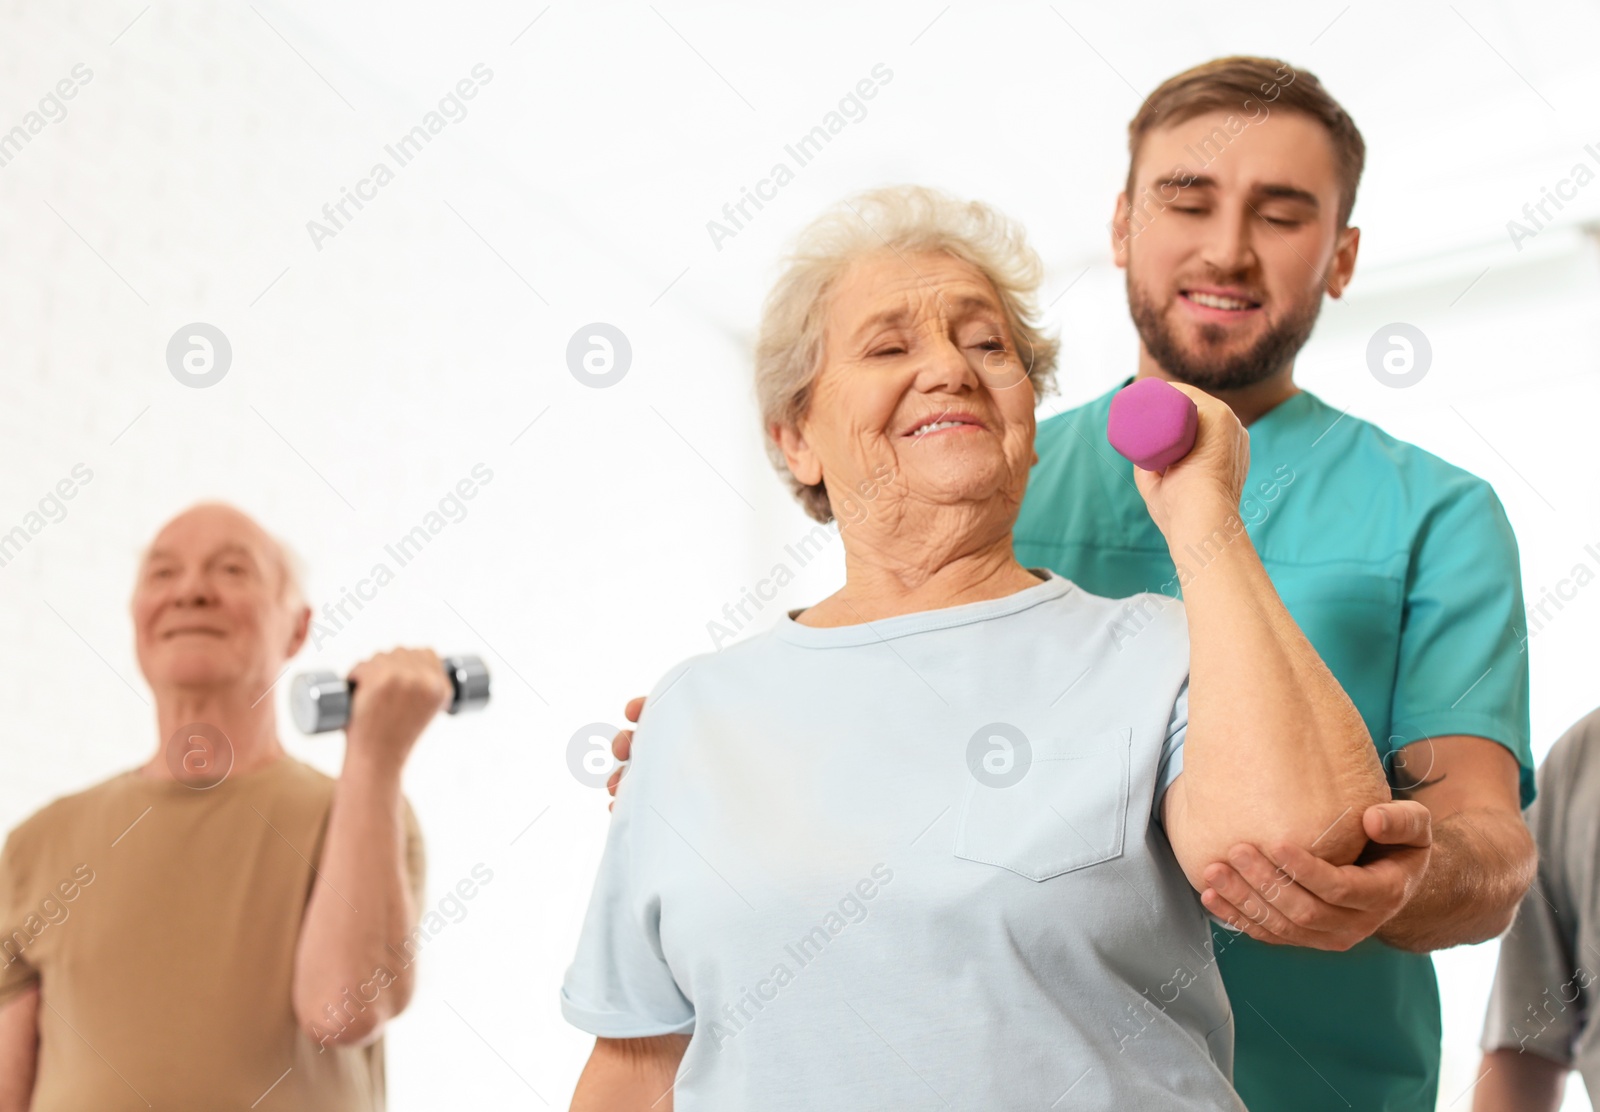 Photo of Care worker helping elderly woman to do exercise with dumbbell in hospital gym